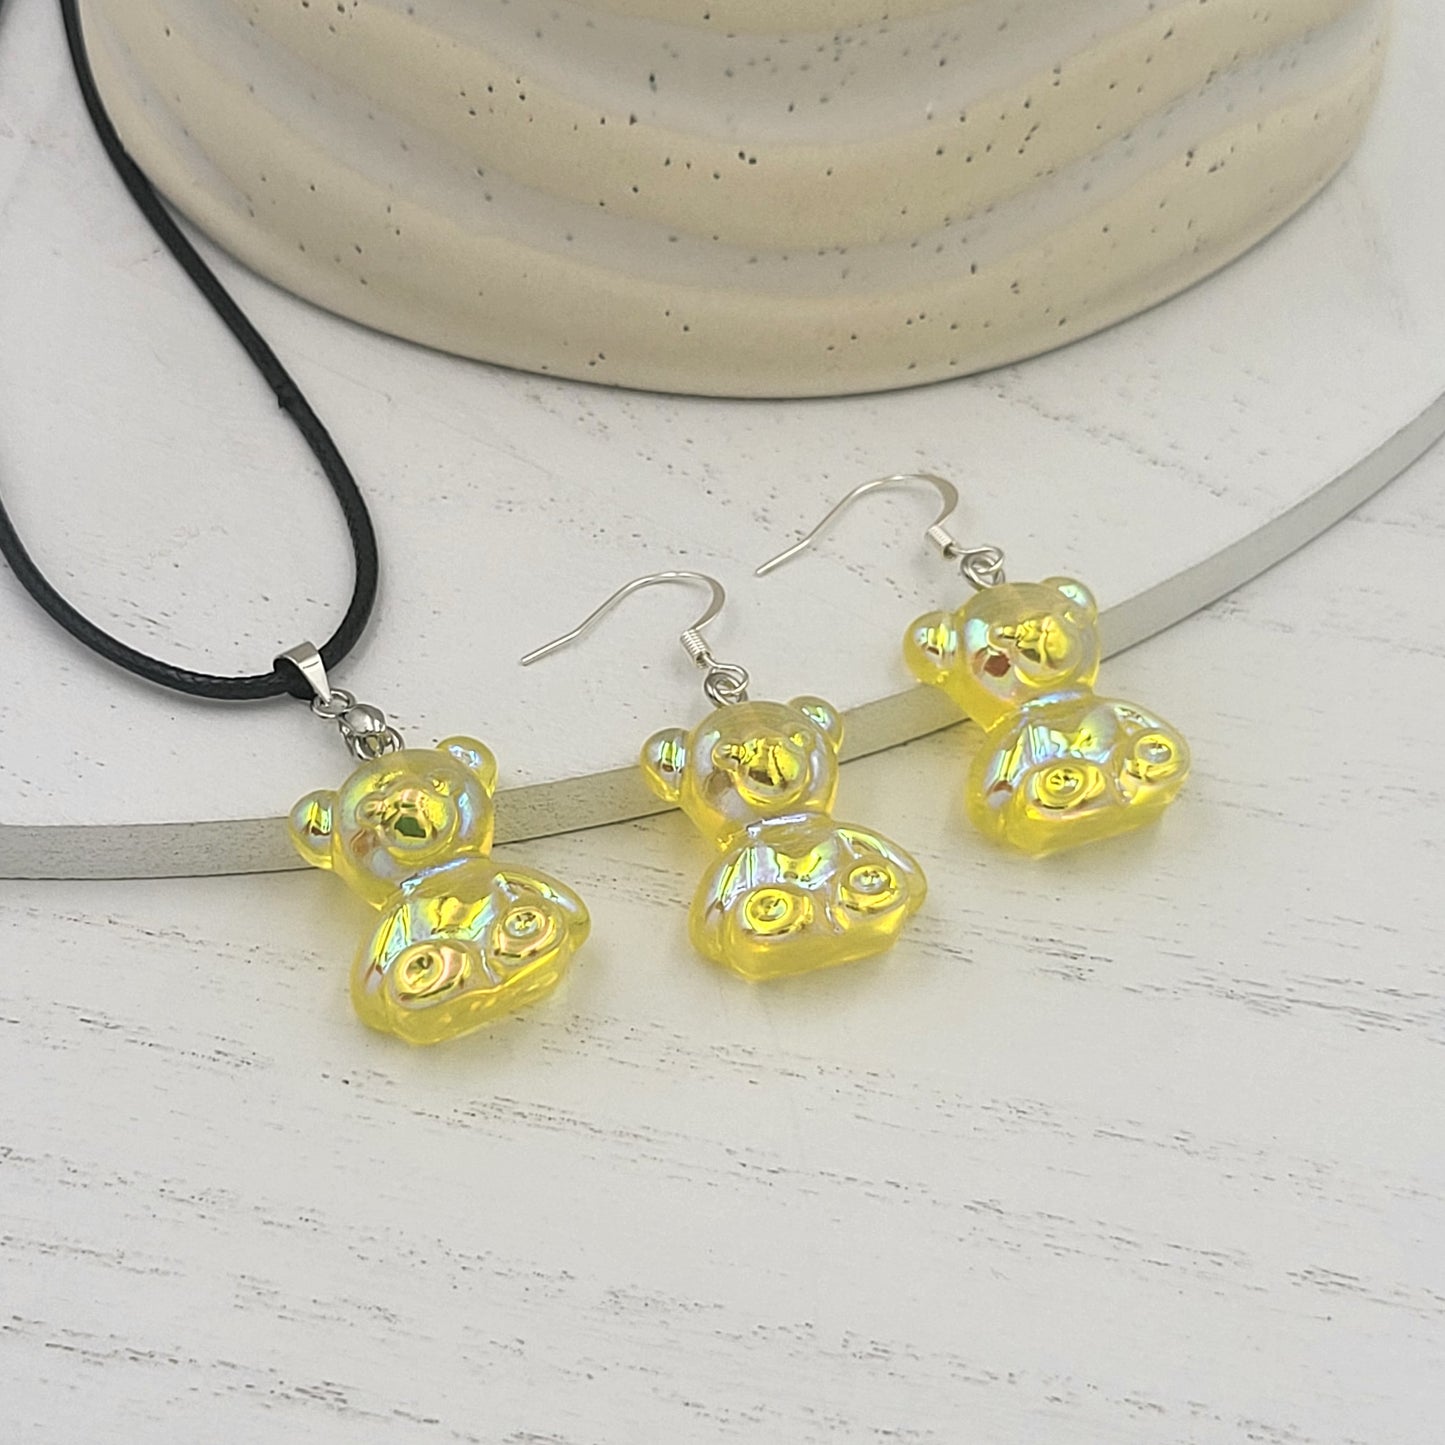 BESHEEK Silvertone and Yellow Resin Gummy Bear Jewelry Set | Hypoallergenic Boho Kitchsy Artistic Funky Cute Style Fashion Necklace and Earrings